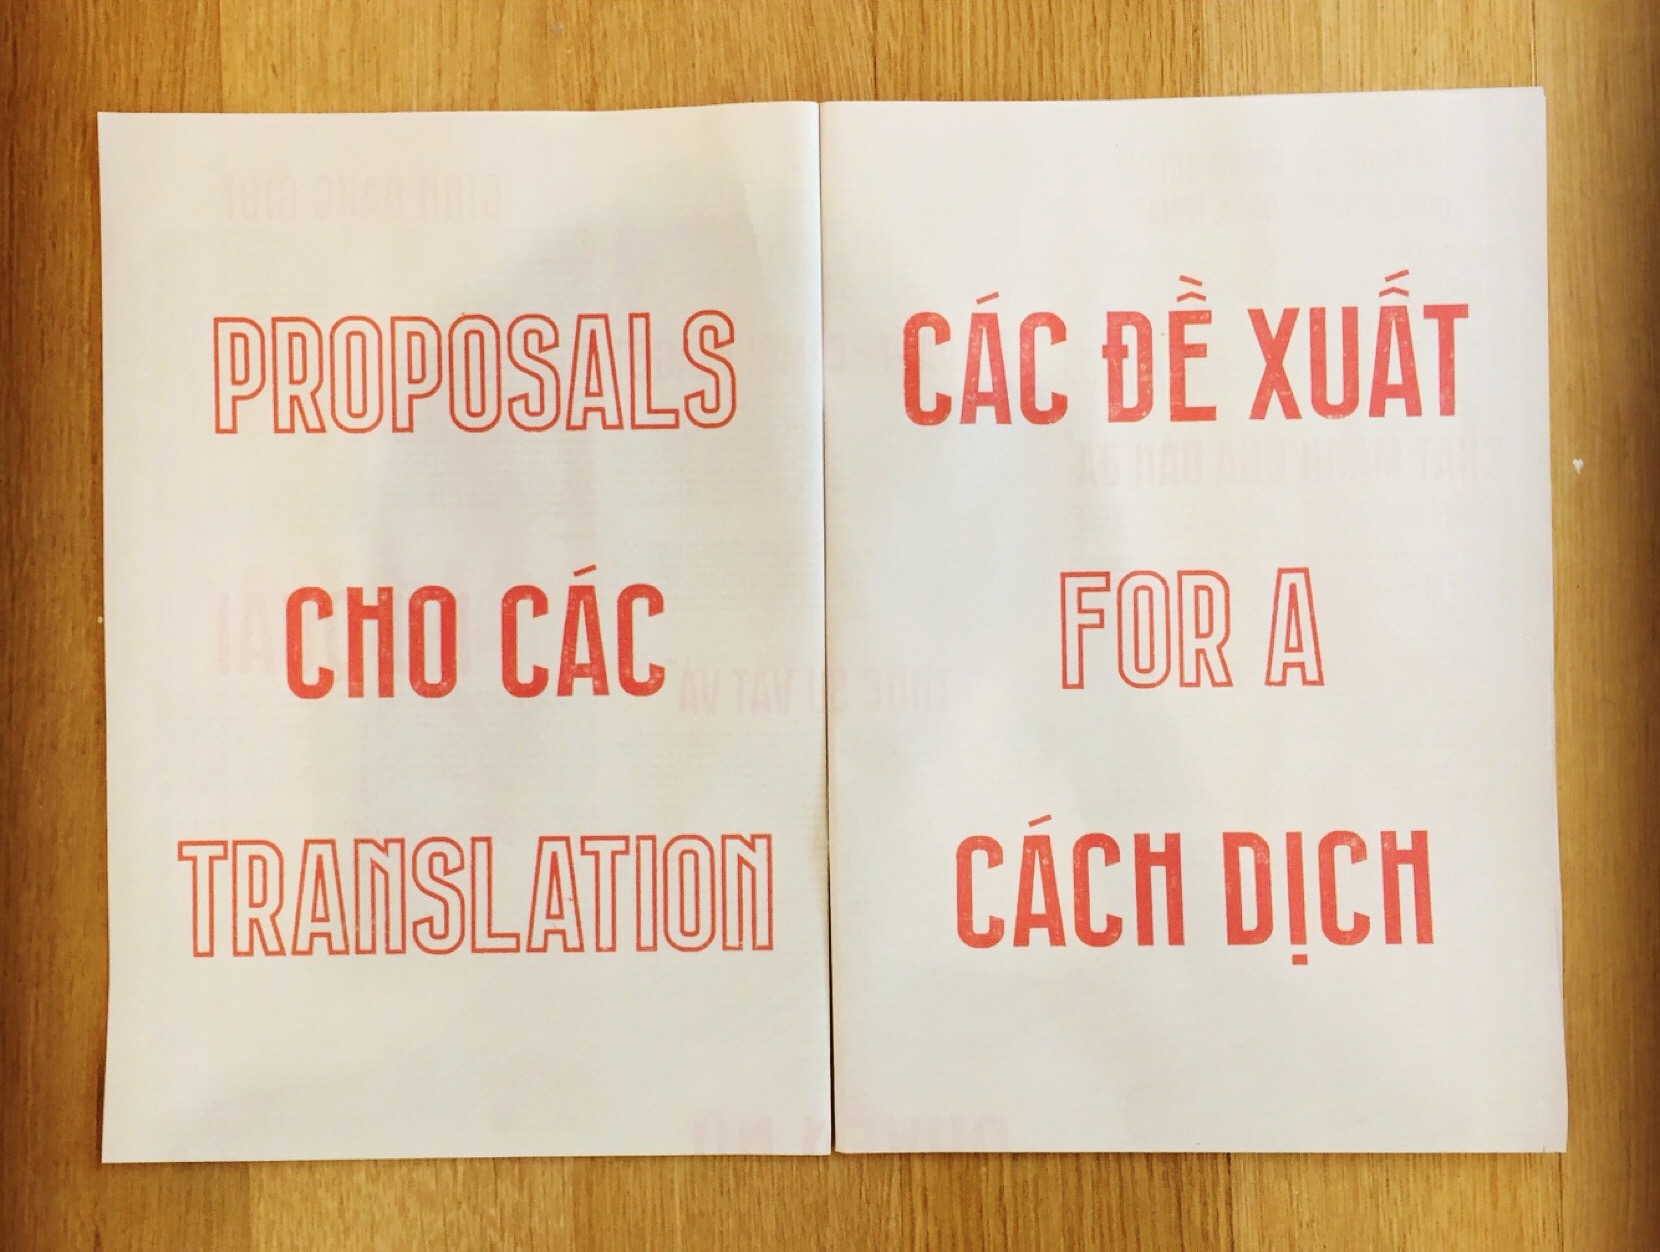   Proposals for a Translation  Lasercut wooden stamp set with custom typeface (in collaboration with Giang Nguyễn), newspaper (including contributions from Ash Mayfair, Nguyễn Hồ Mỹ Tâm, Viet Nguyen, Do Tuong Linh, Anonymous, Phuong Nguyen, Nau, Nhun